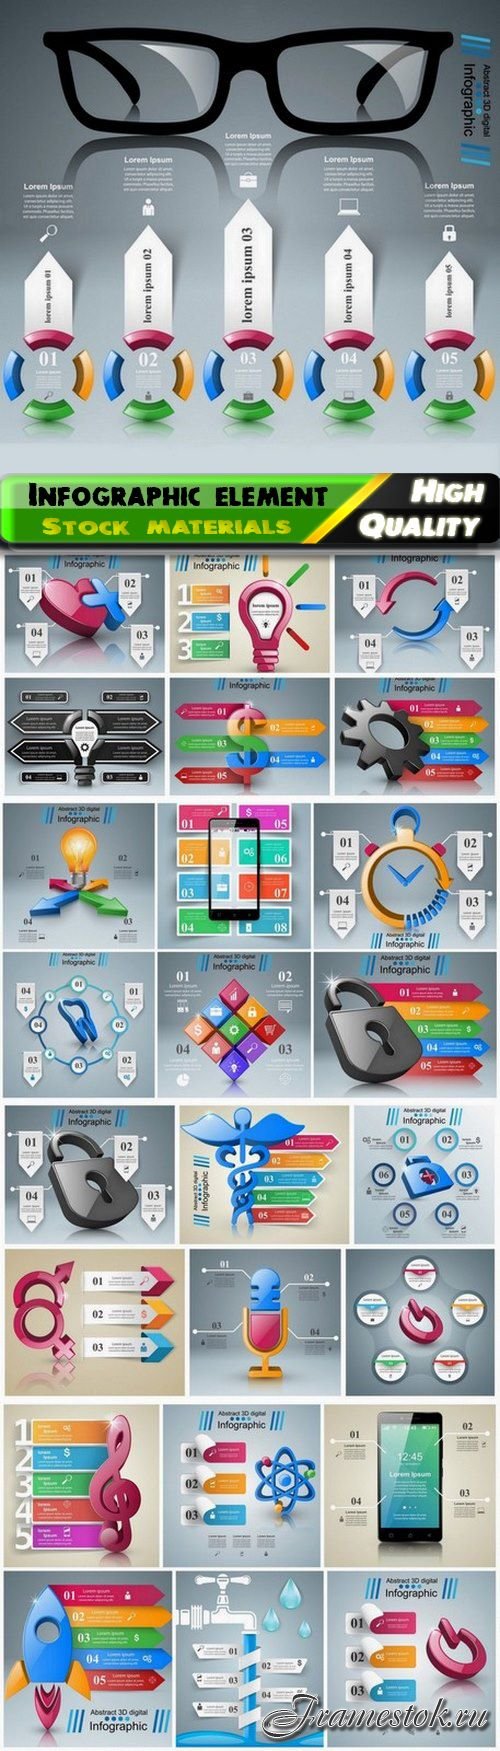 Business company infographic element with diagram - 25 Eps